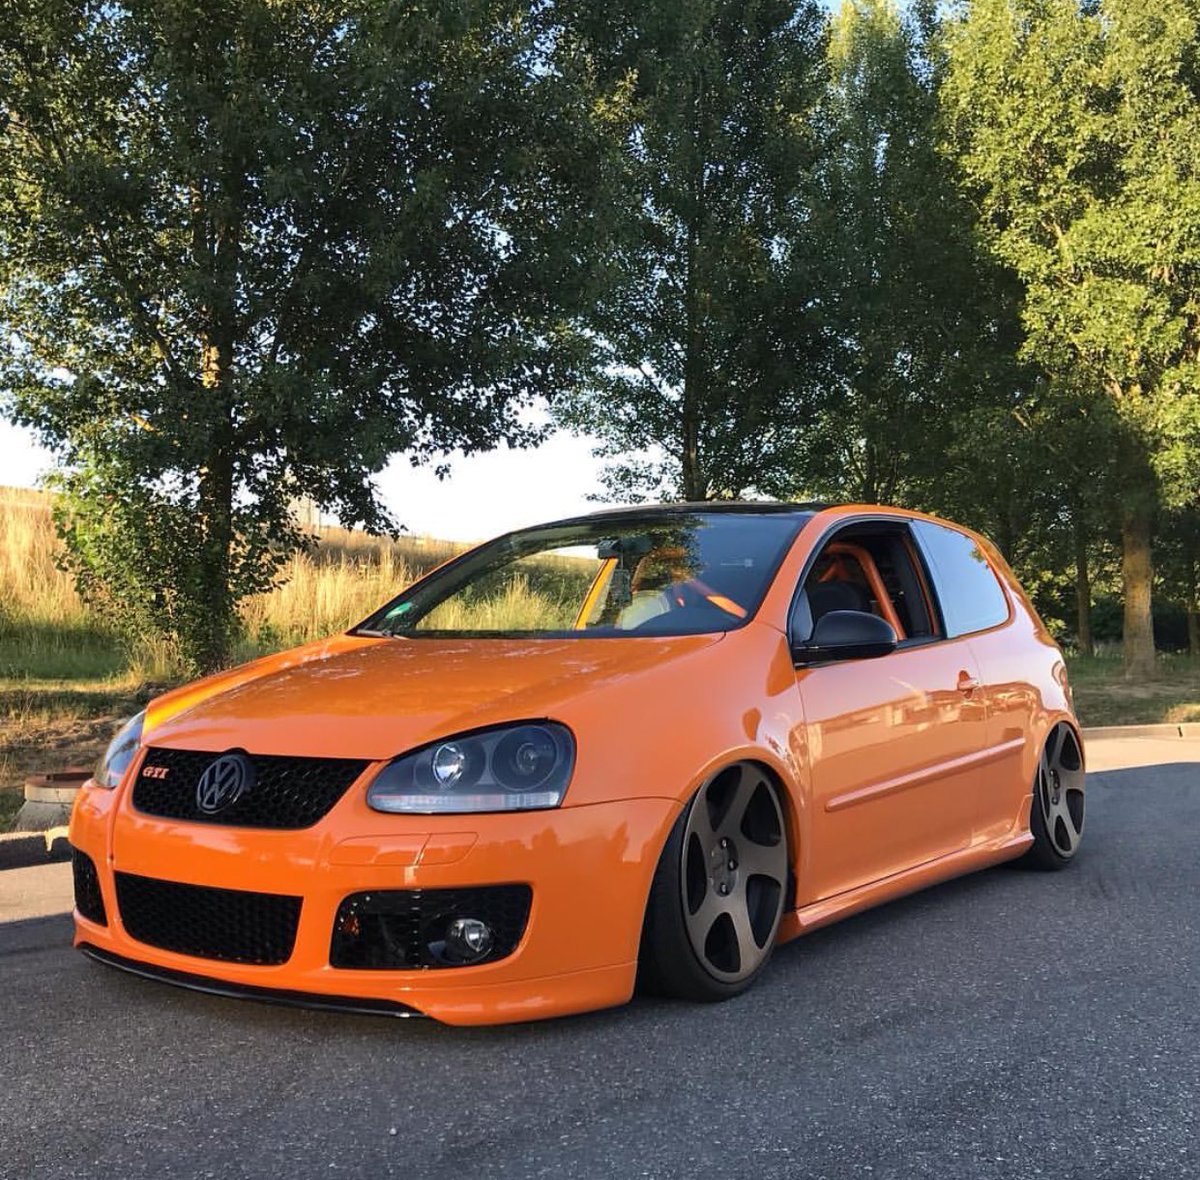 EpicDubs on Twitter: "🖋 Story continues, enter the Golf 5 as we head  towards the #Golf8 #VW #Volkswagen #Mk5 #VwGolf #Mk5Golf #GTI #Stance  #DubLife https://t.co/qGtk7s2Ulh" / Twitter